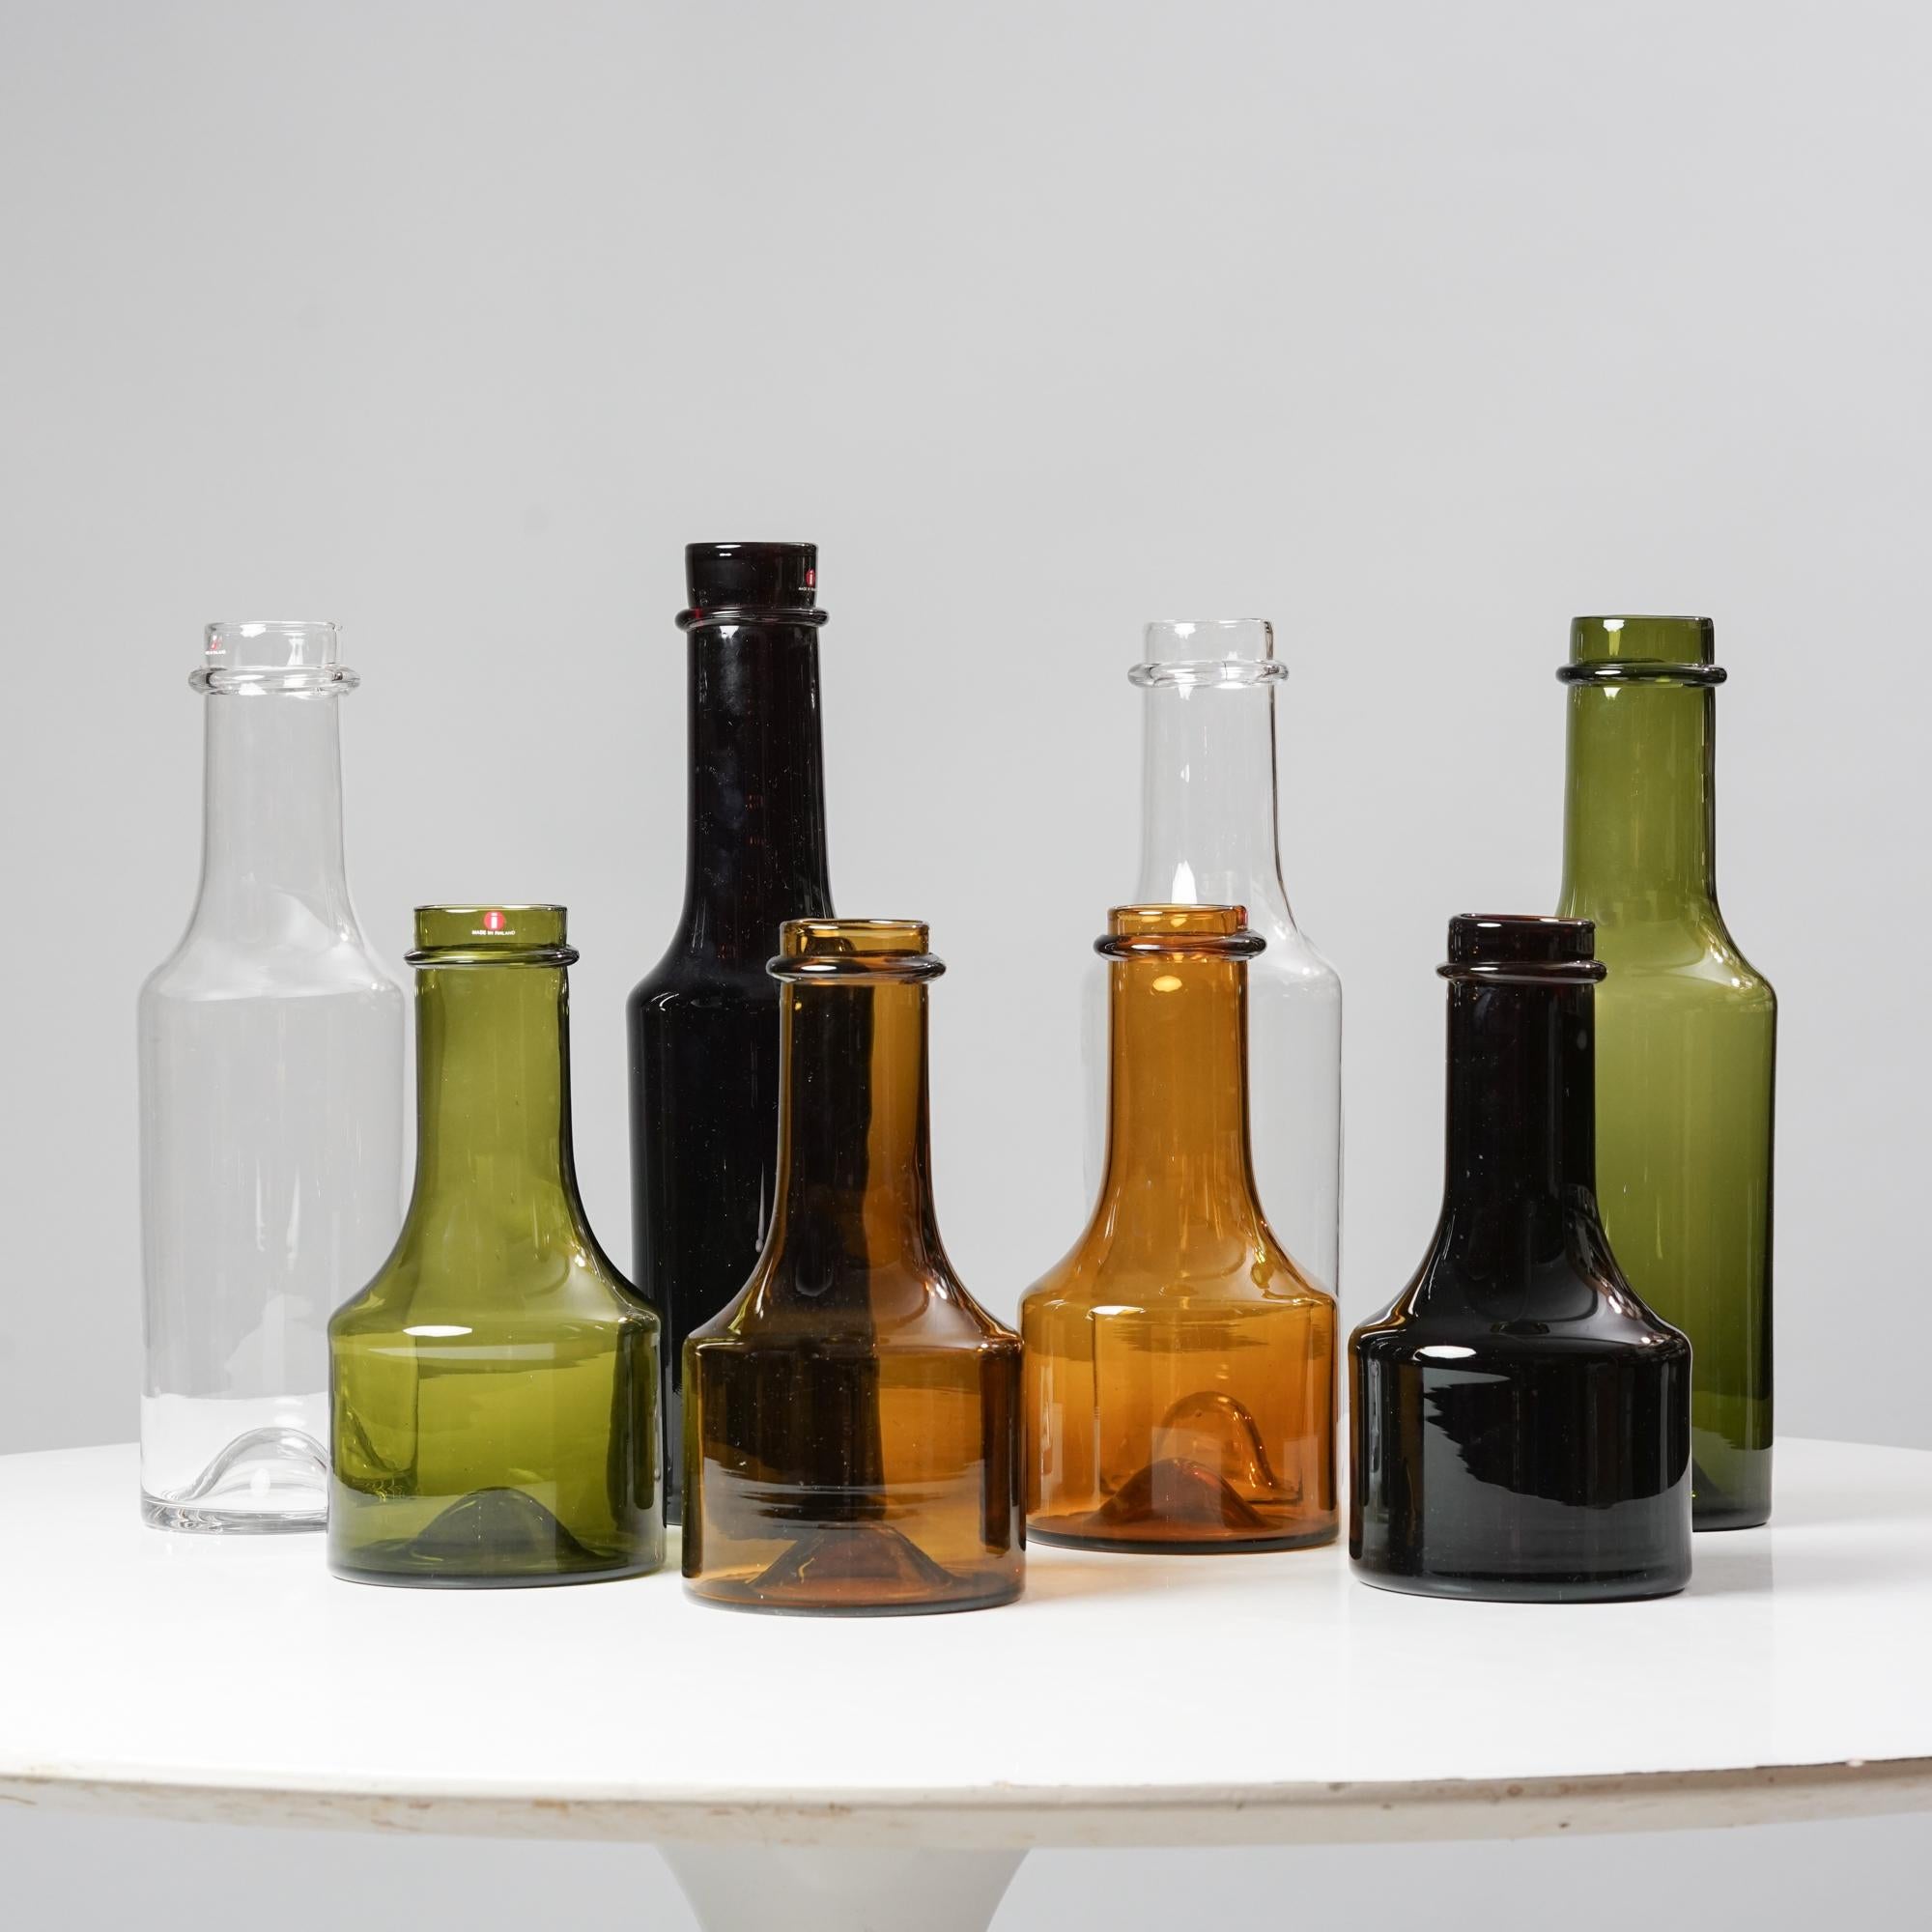 Bottle Set models 2507 & 2508 designed by Tapio Wirkkala, manufactured by Iittala, Mid-20th Century. The set includes 8 bottles. Marked and signed. Good vintage condition, minor patina and wear consistent with age and use. The bottles are sold as a